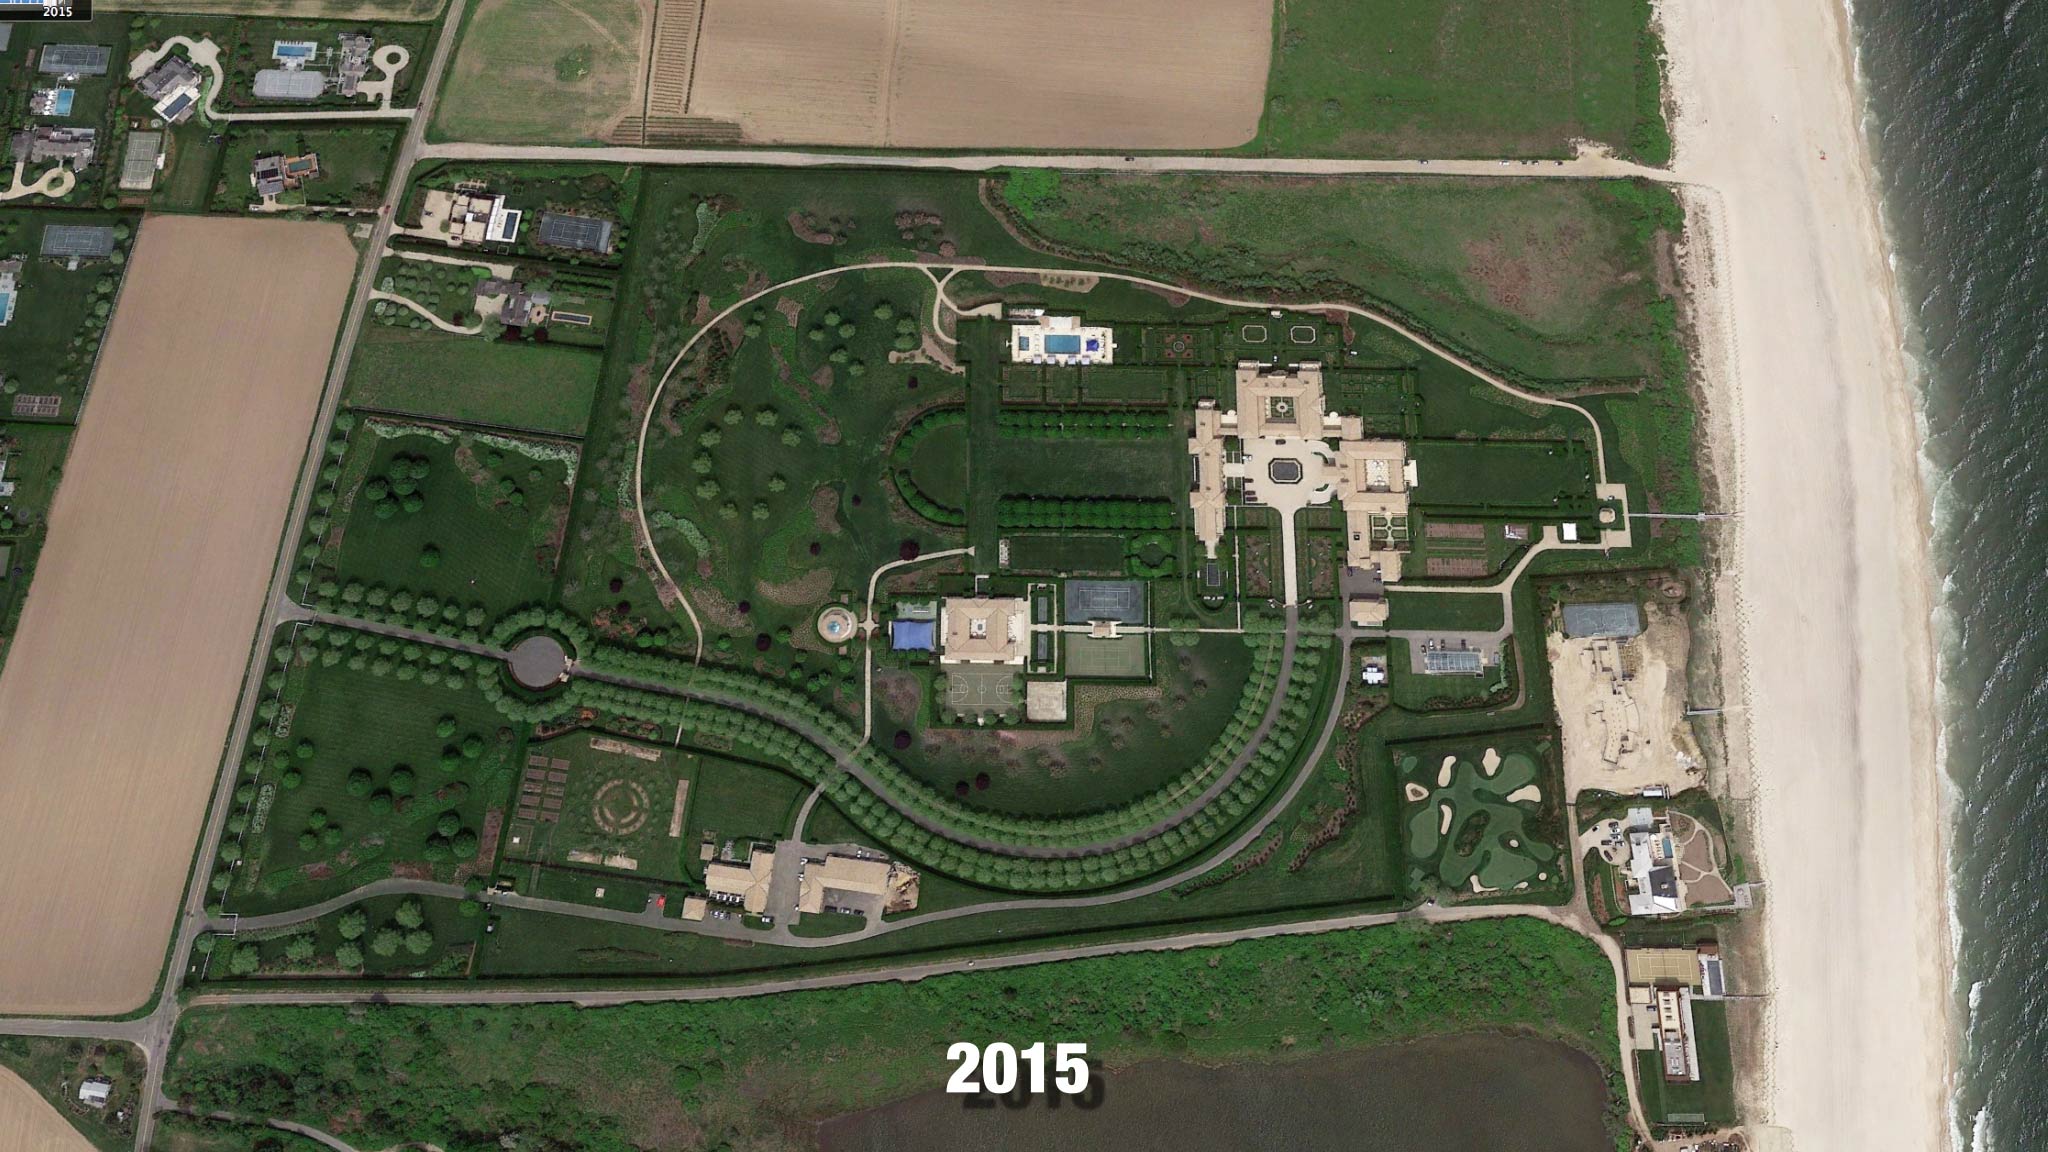 Hamptons, NY satellite image from 2015 after a controversial mega-mansion was built